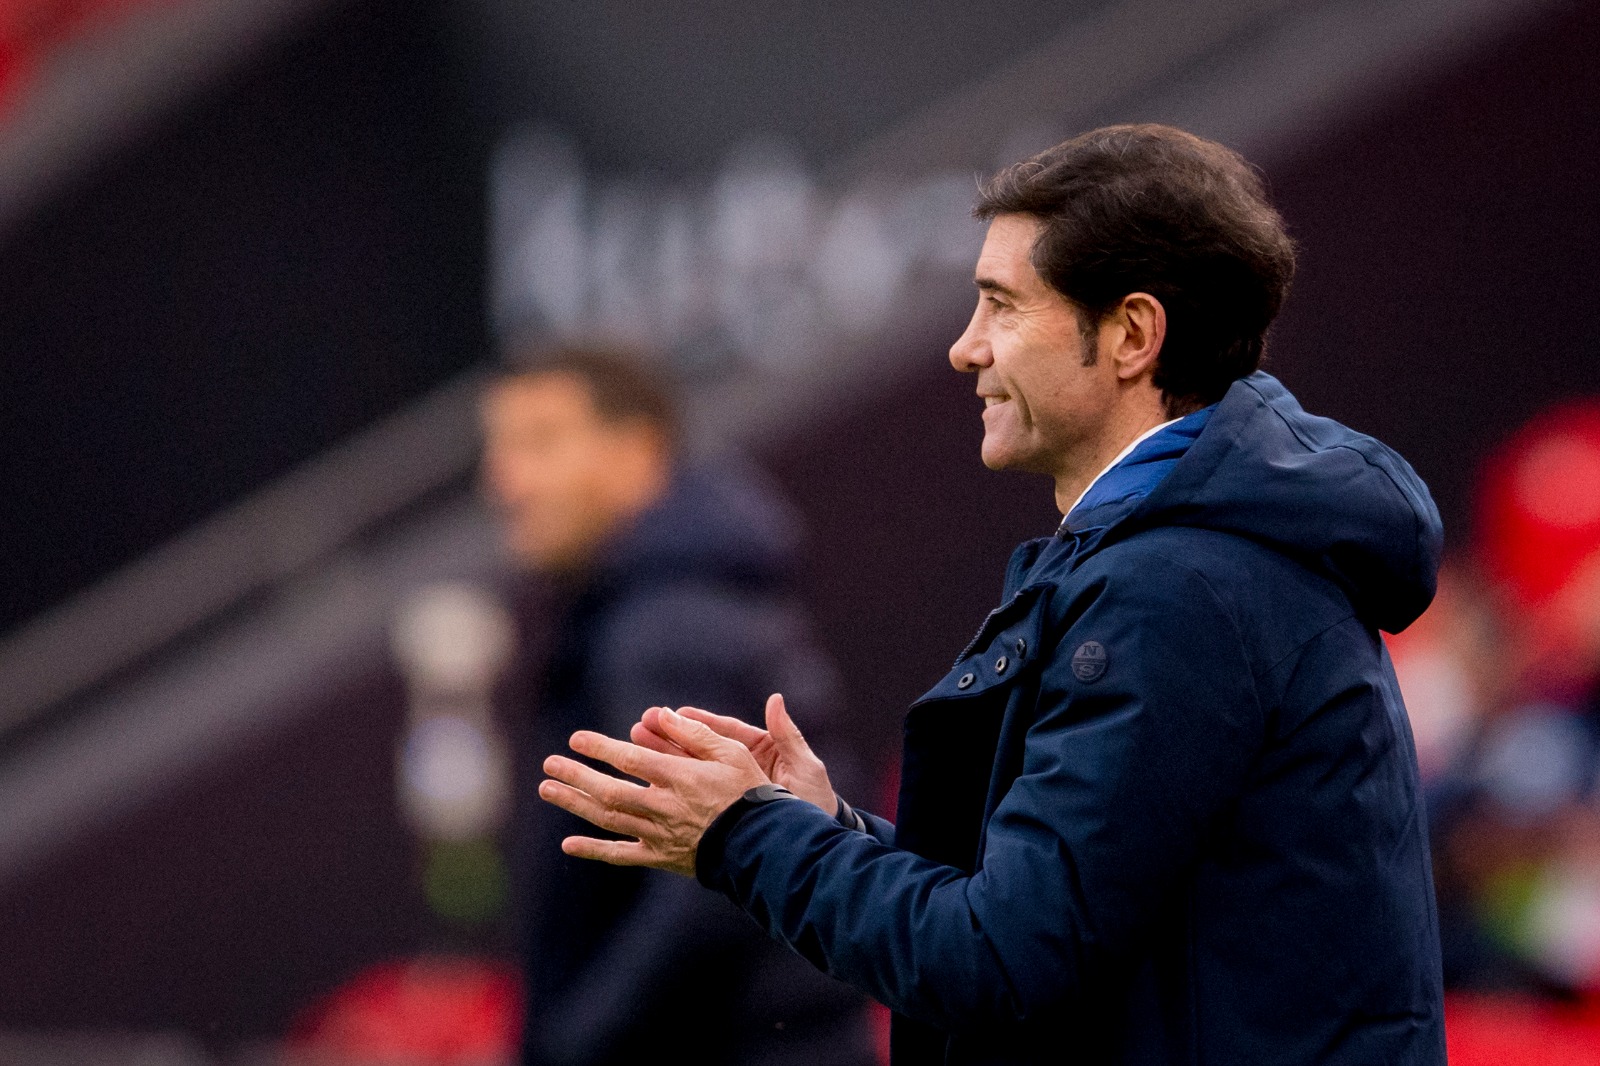 La Liga weekly roundup: Marcelino reminds Valencia fans of what they are missing